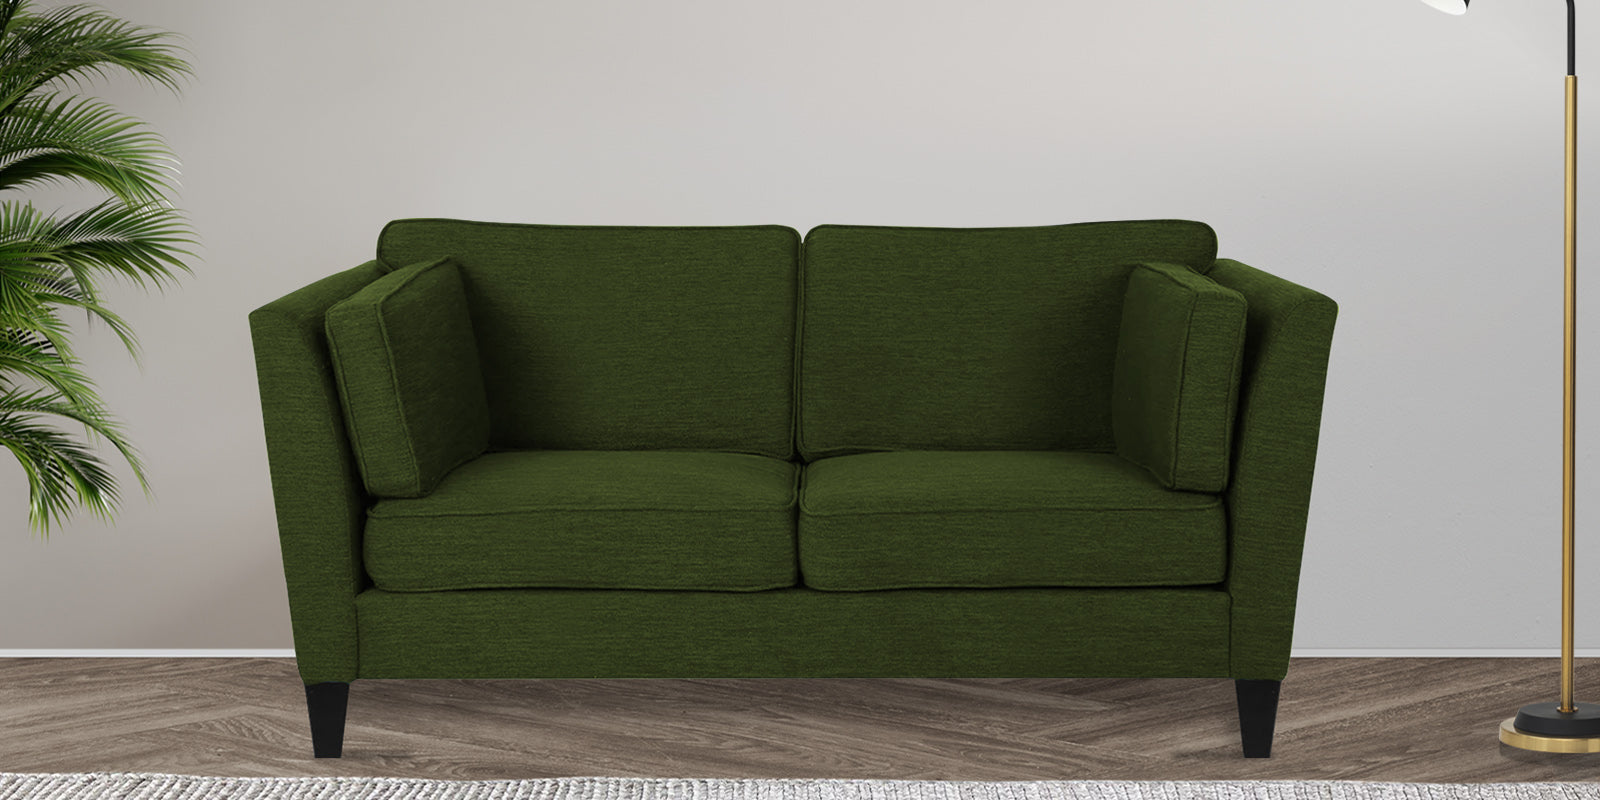 Nigar Fabric 2 Seater Sofa in Olive Green Colour